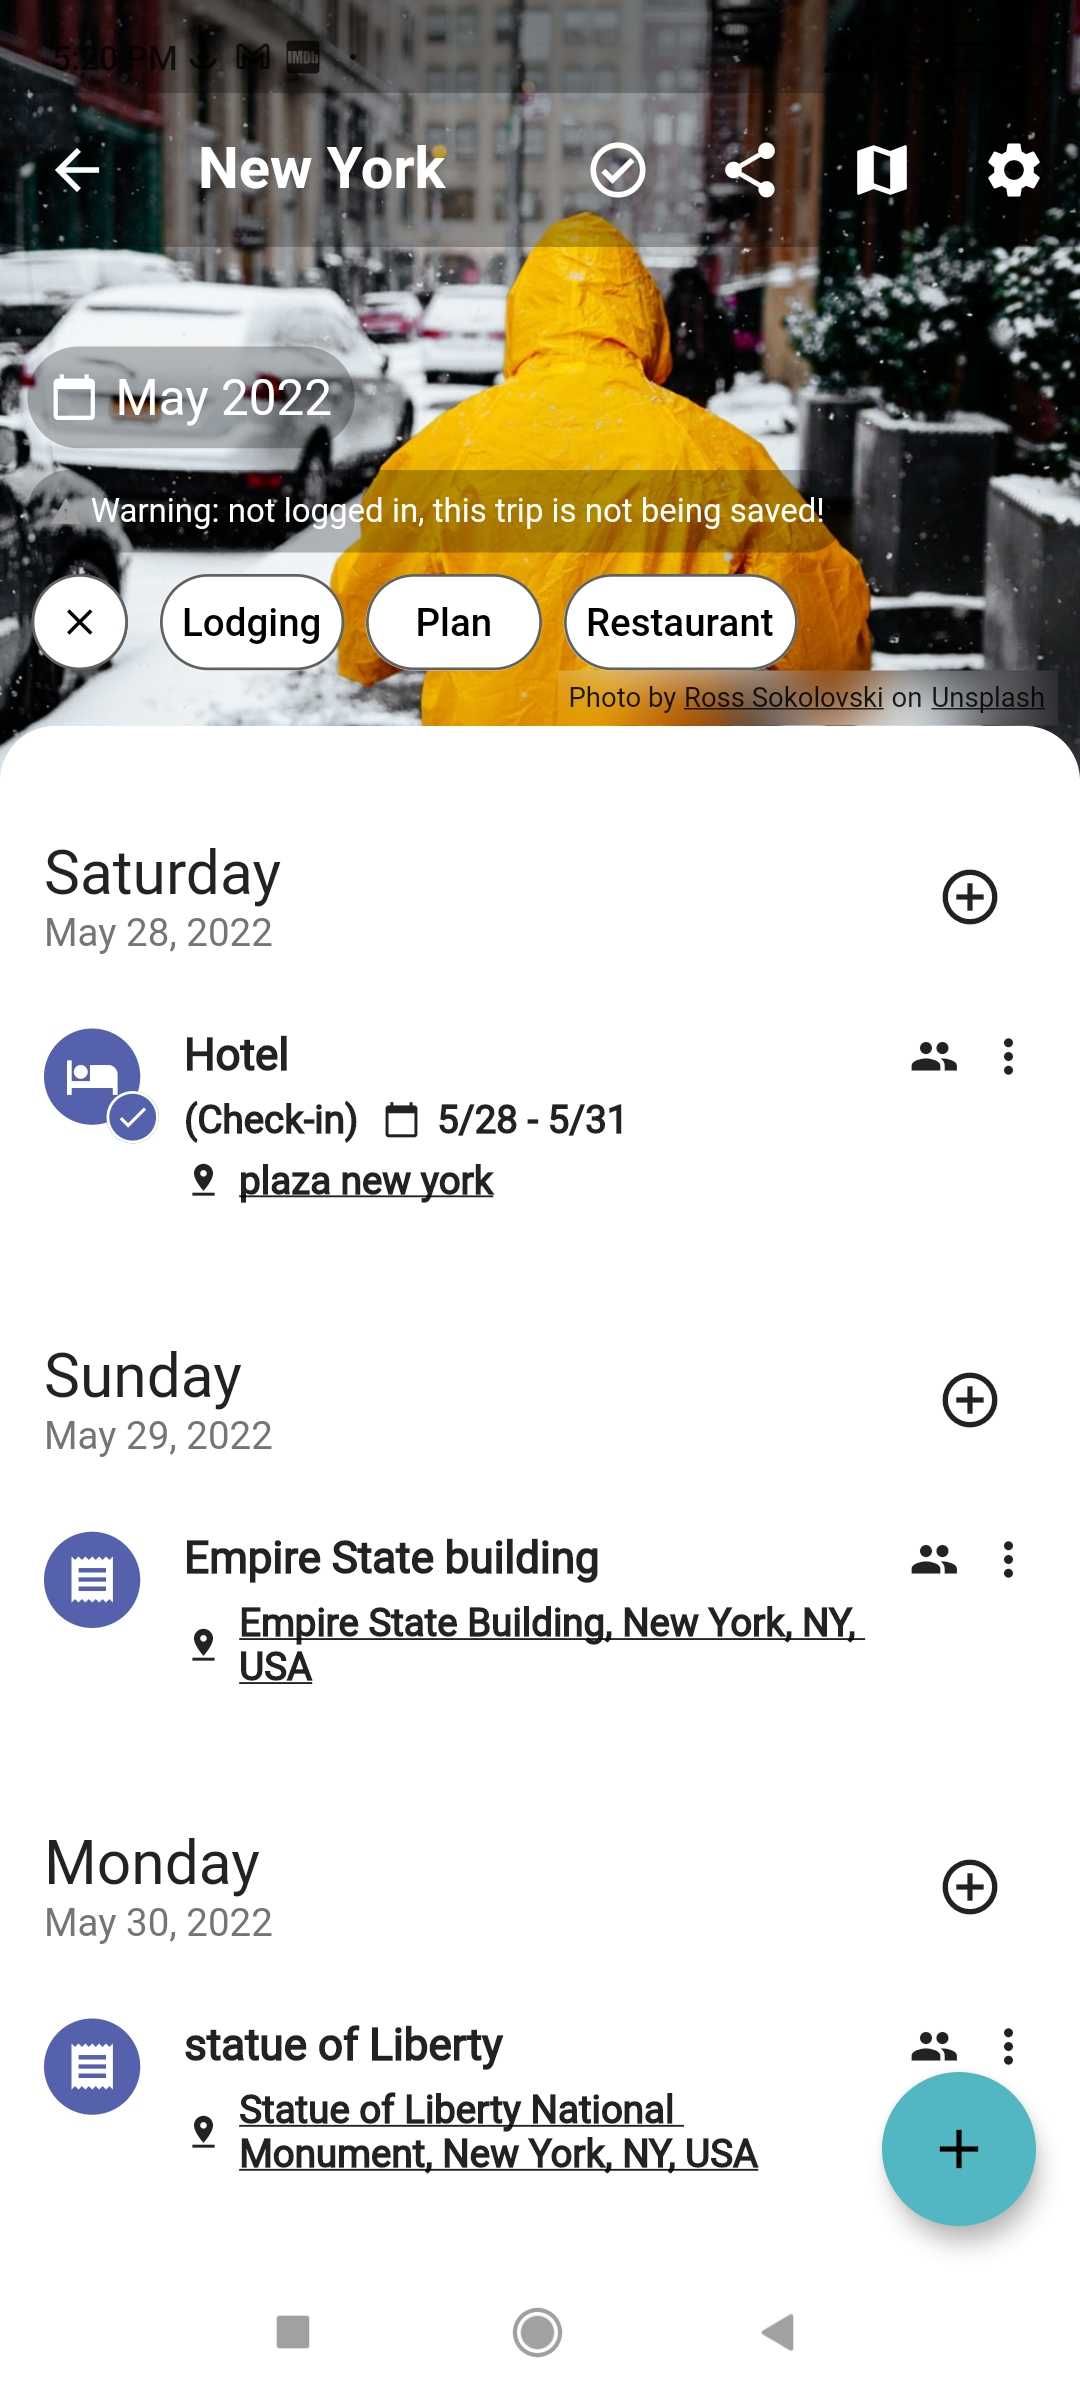 Plip is a fantastic app to plan a trip with friends on phones, seeing your entire agenda